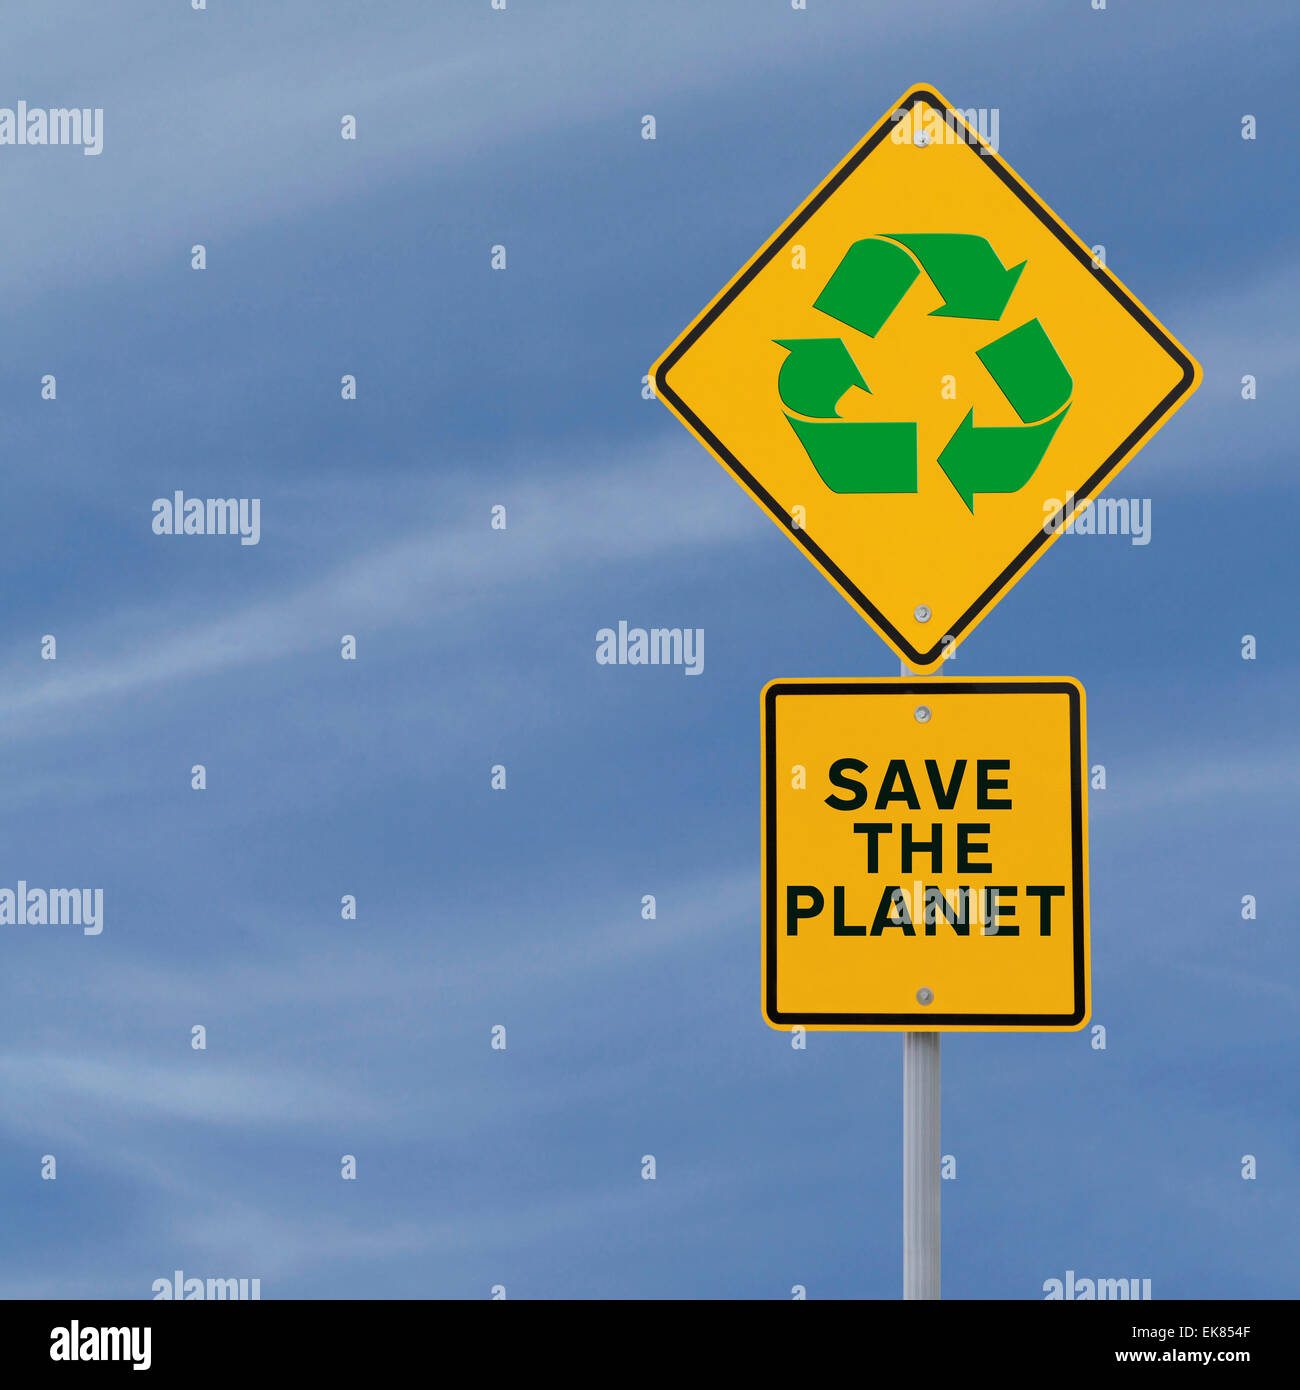 Save the Planet Stock Photo